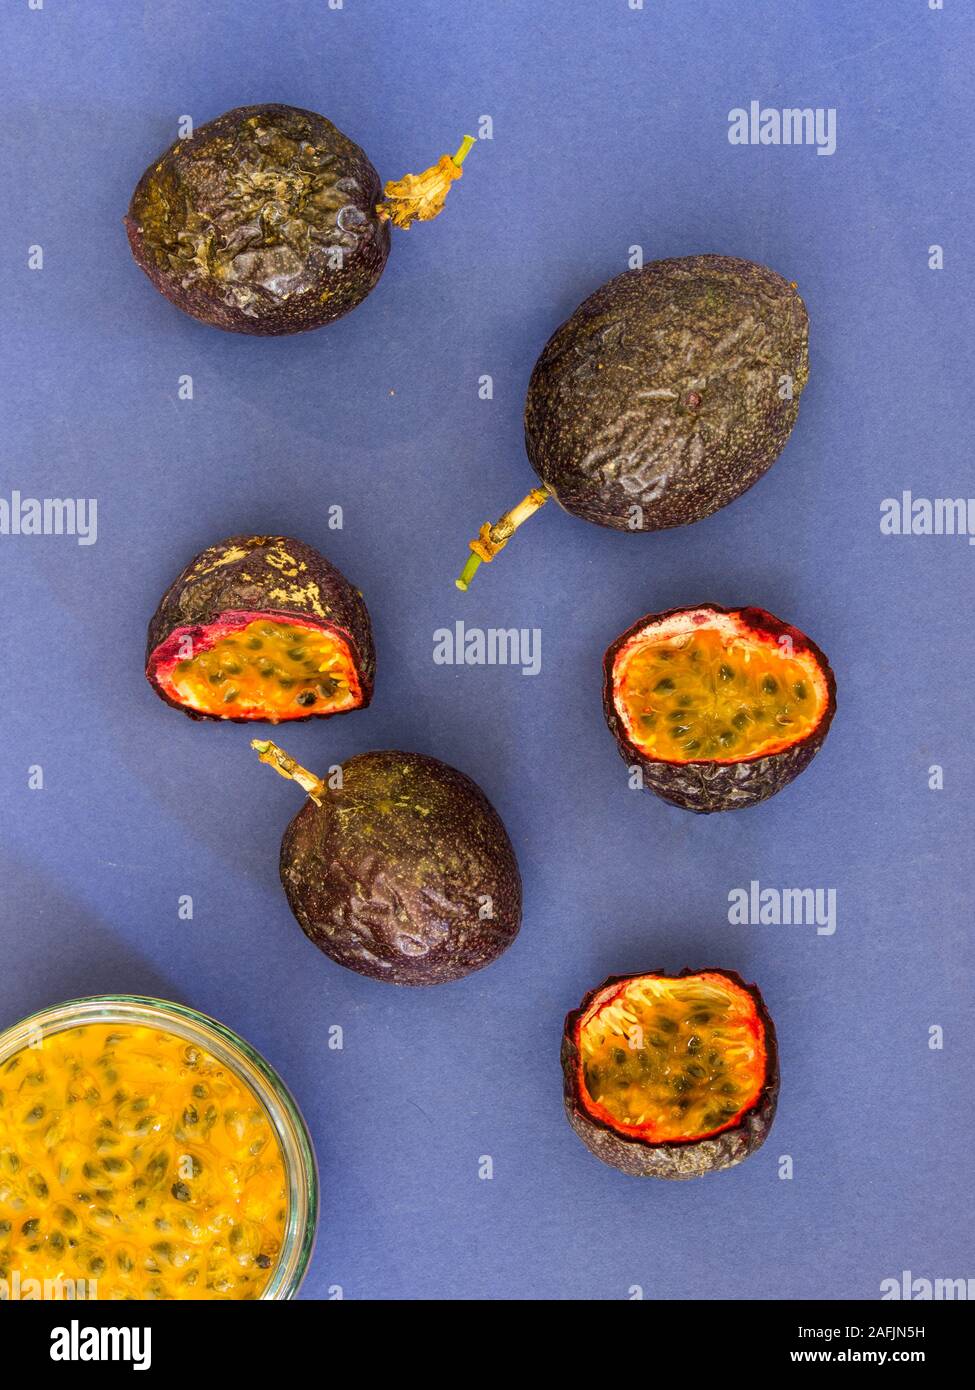 Lay flat composition showing a whole and sliced passion fruit and passion fruit pulp on a blue background Stock Photo